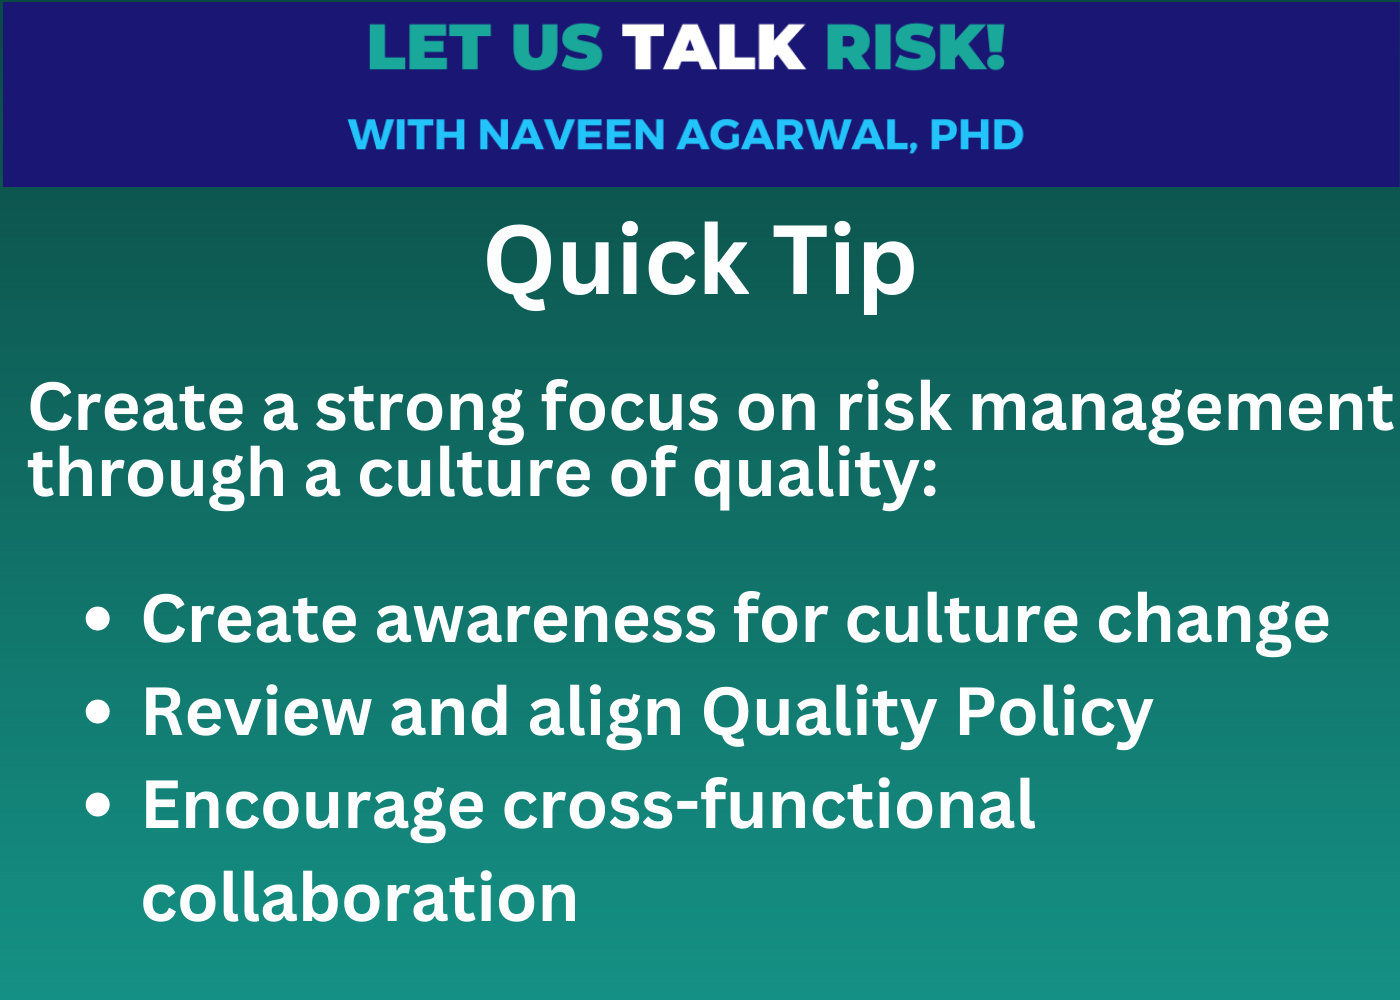 Quick tips for creating a quality culture